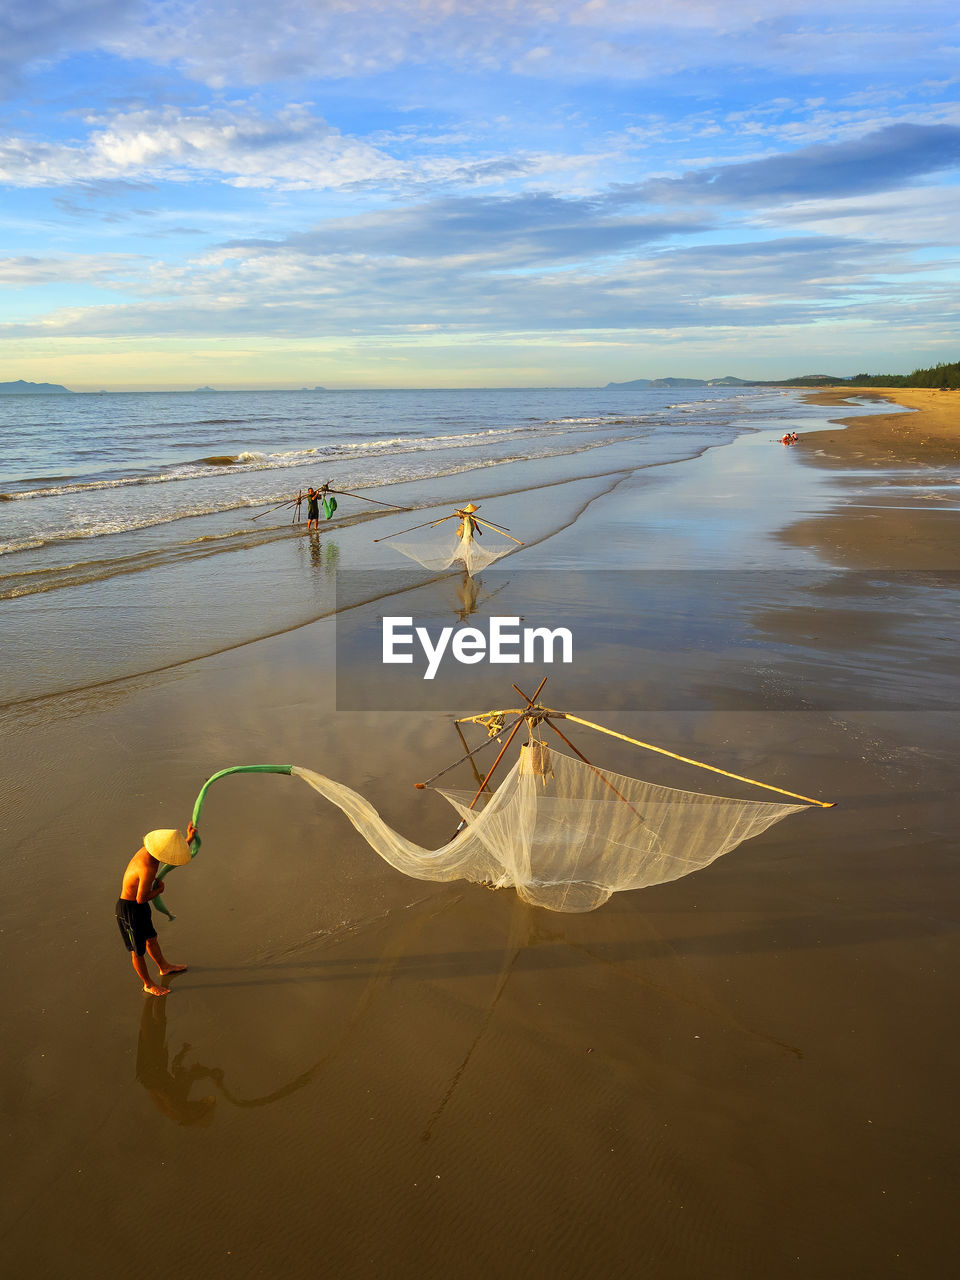 Fishermen working with nets at beach